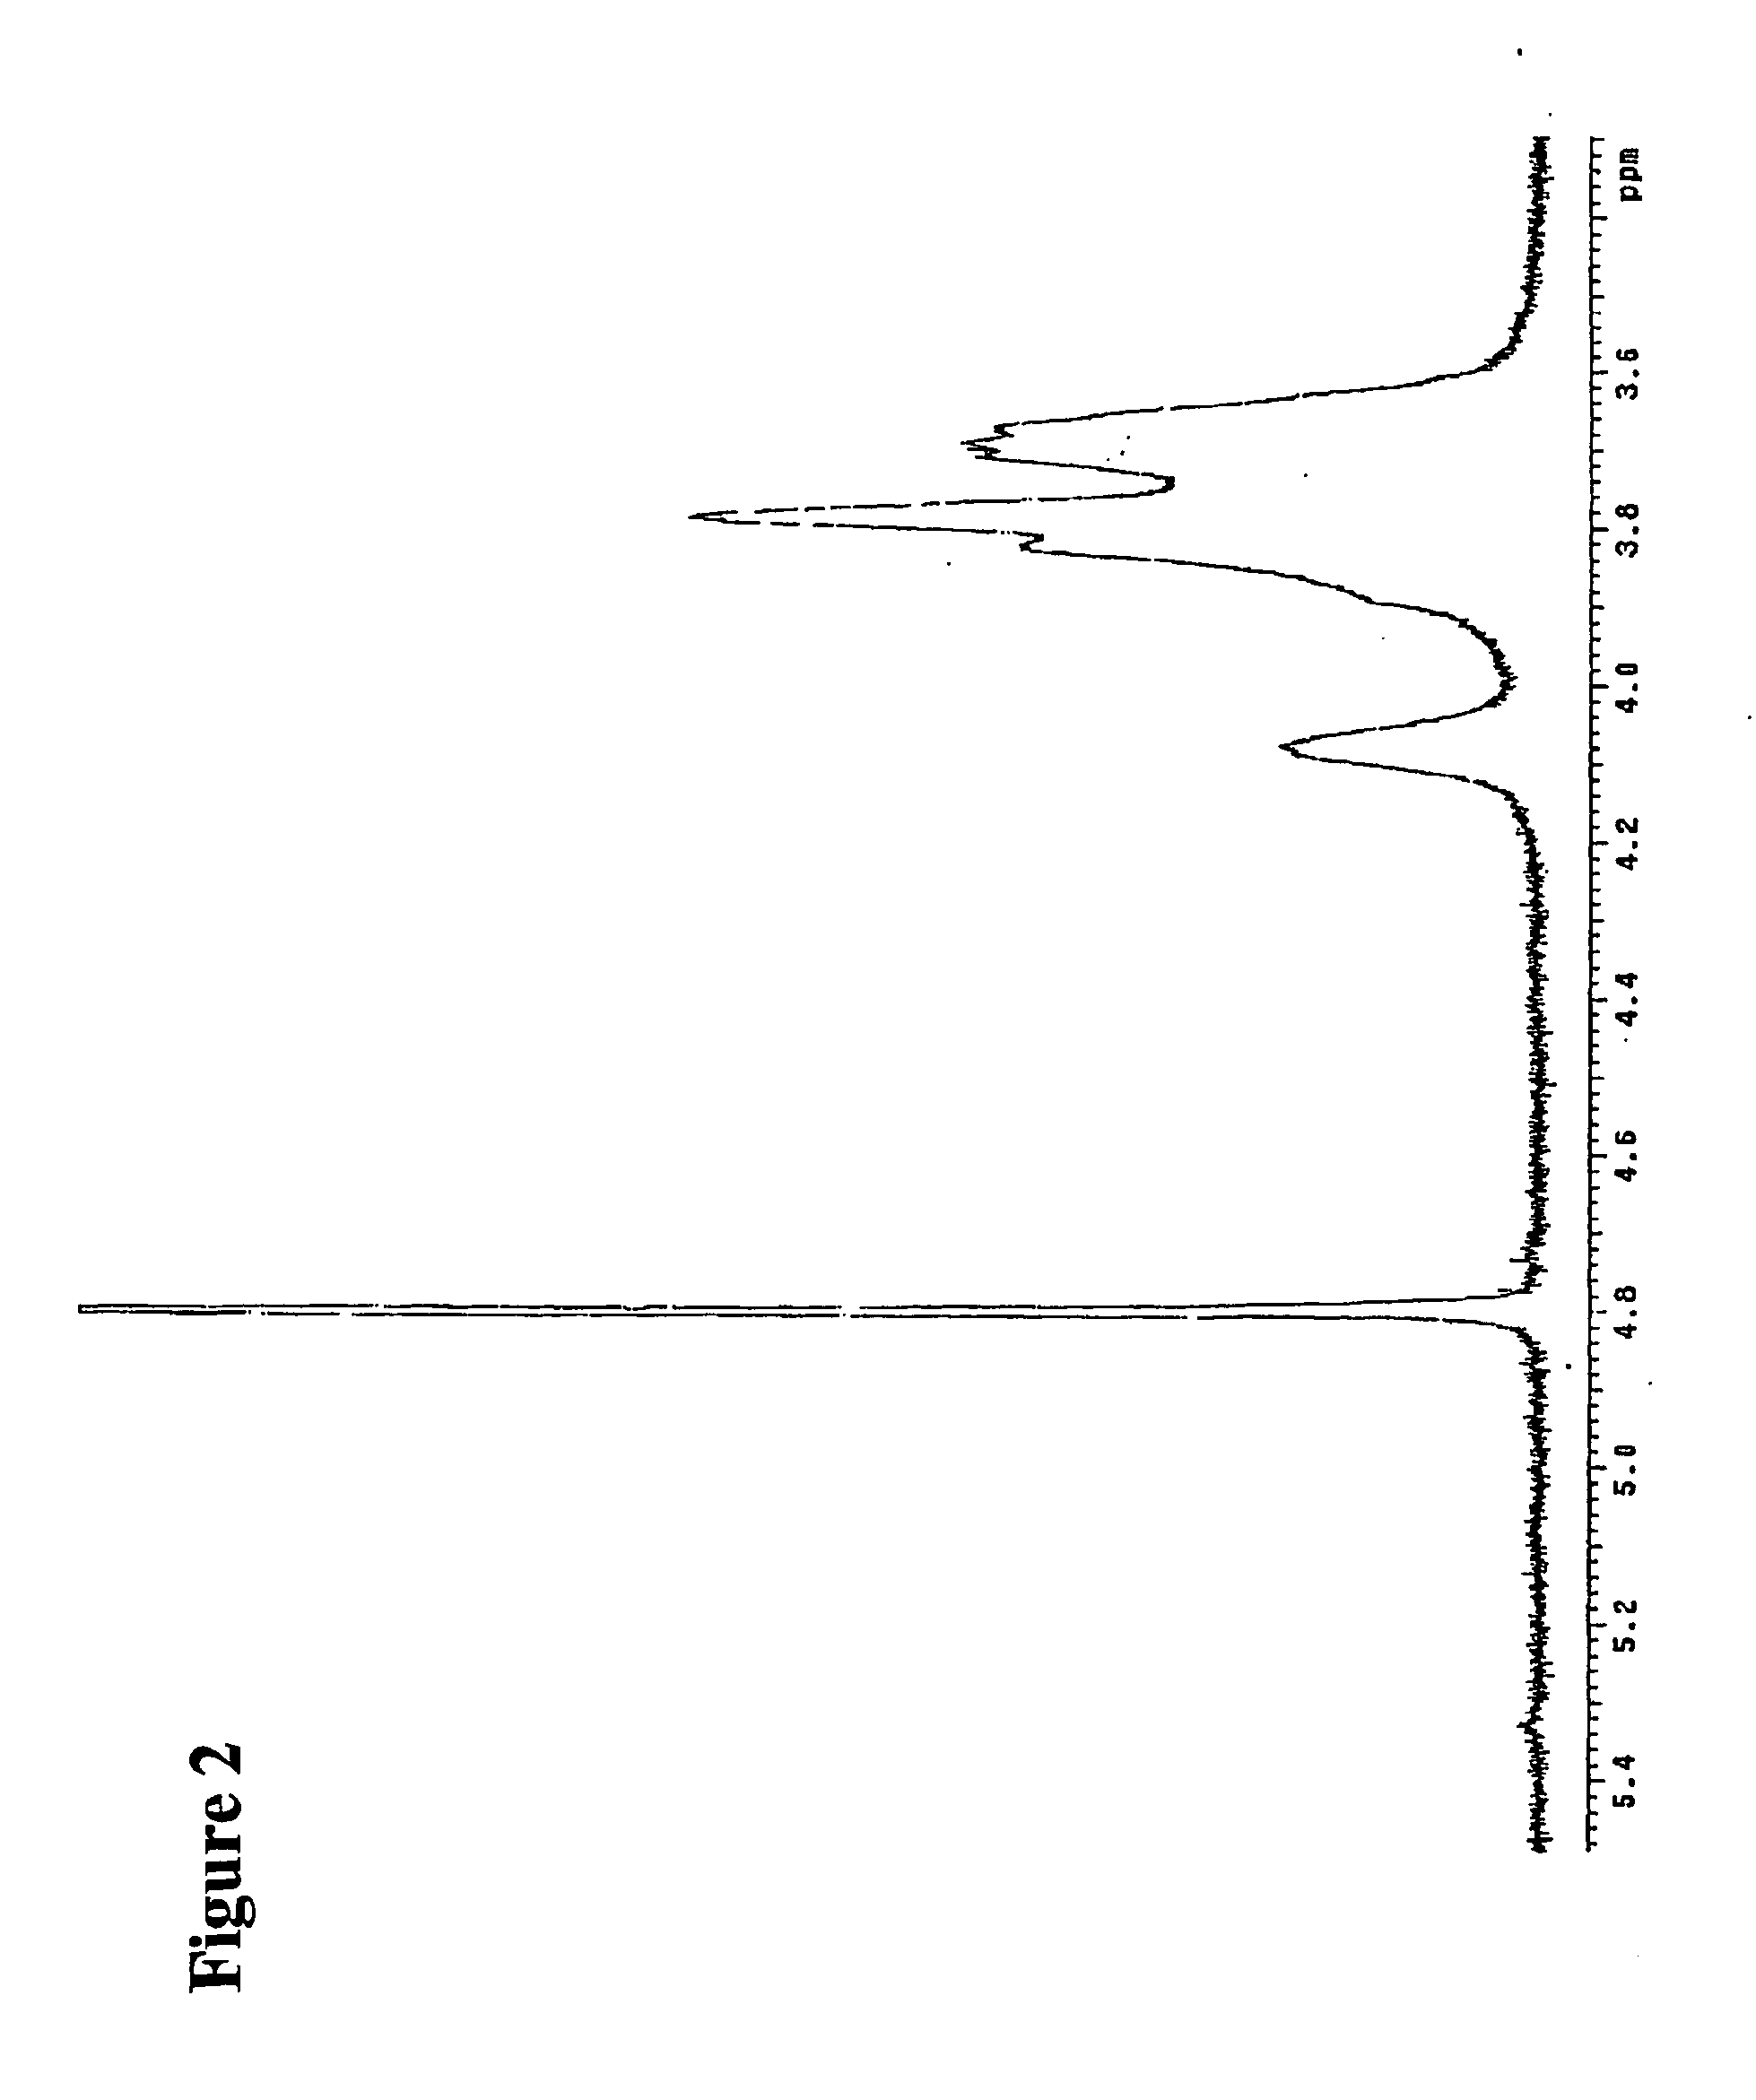 Biodegradable polyketal polymers and methods for their formation and use